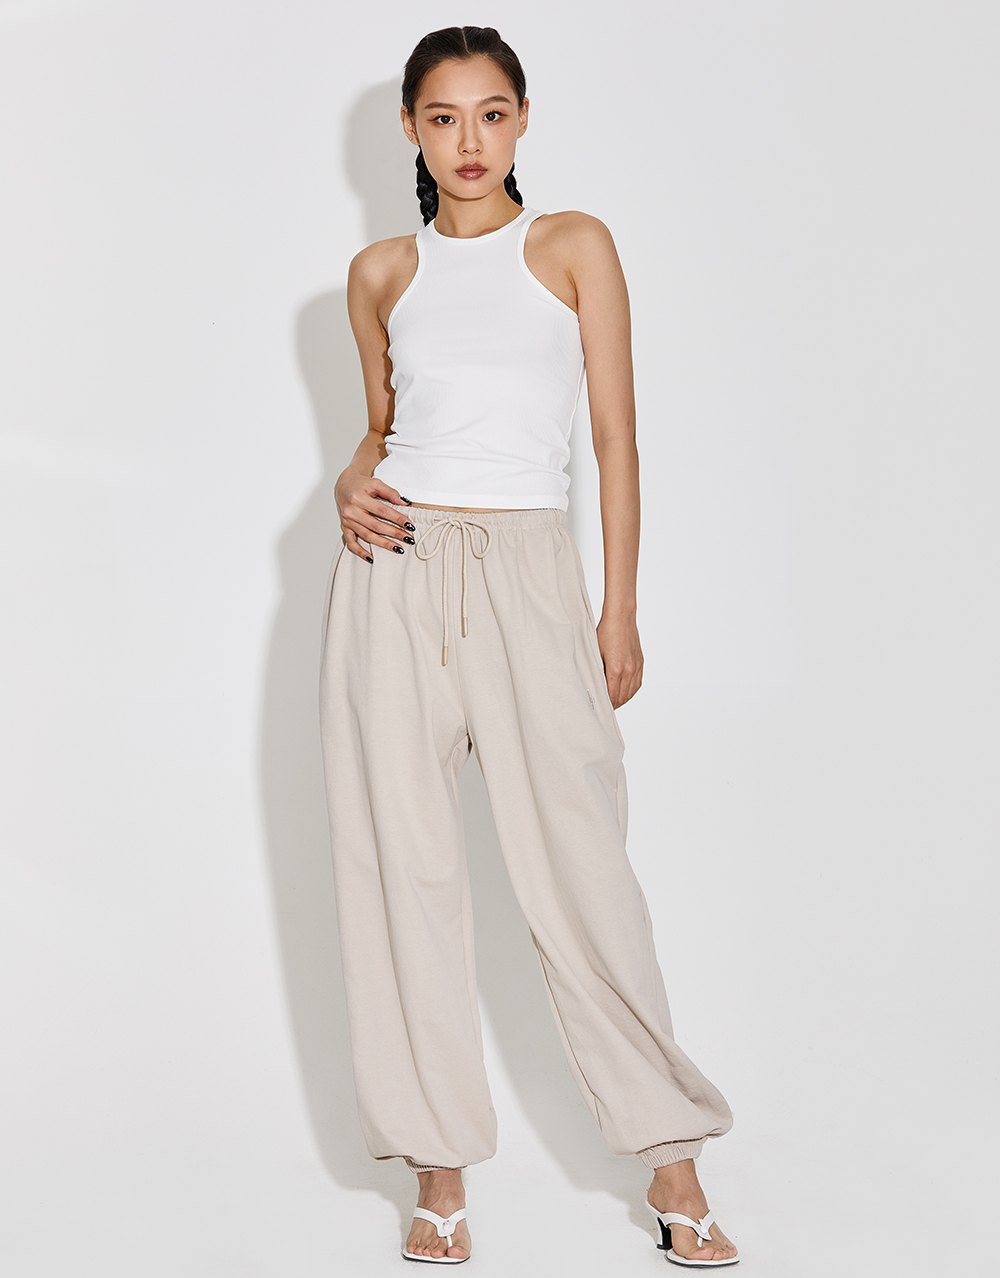 RELAXED LIGHTWEIGHT SWEATPANTS